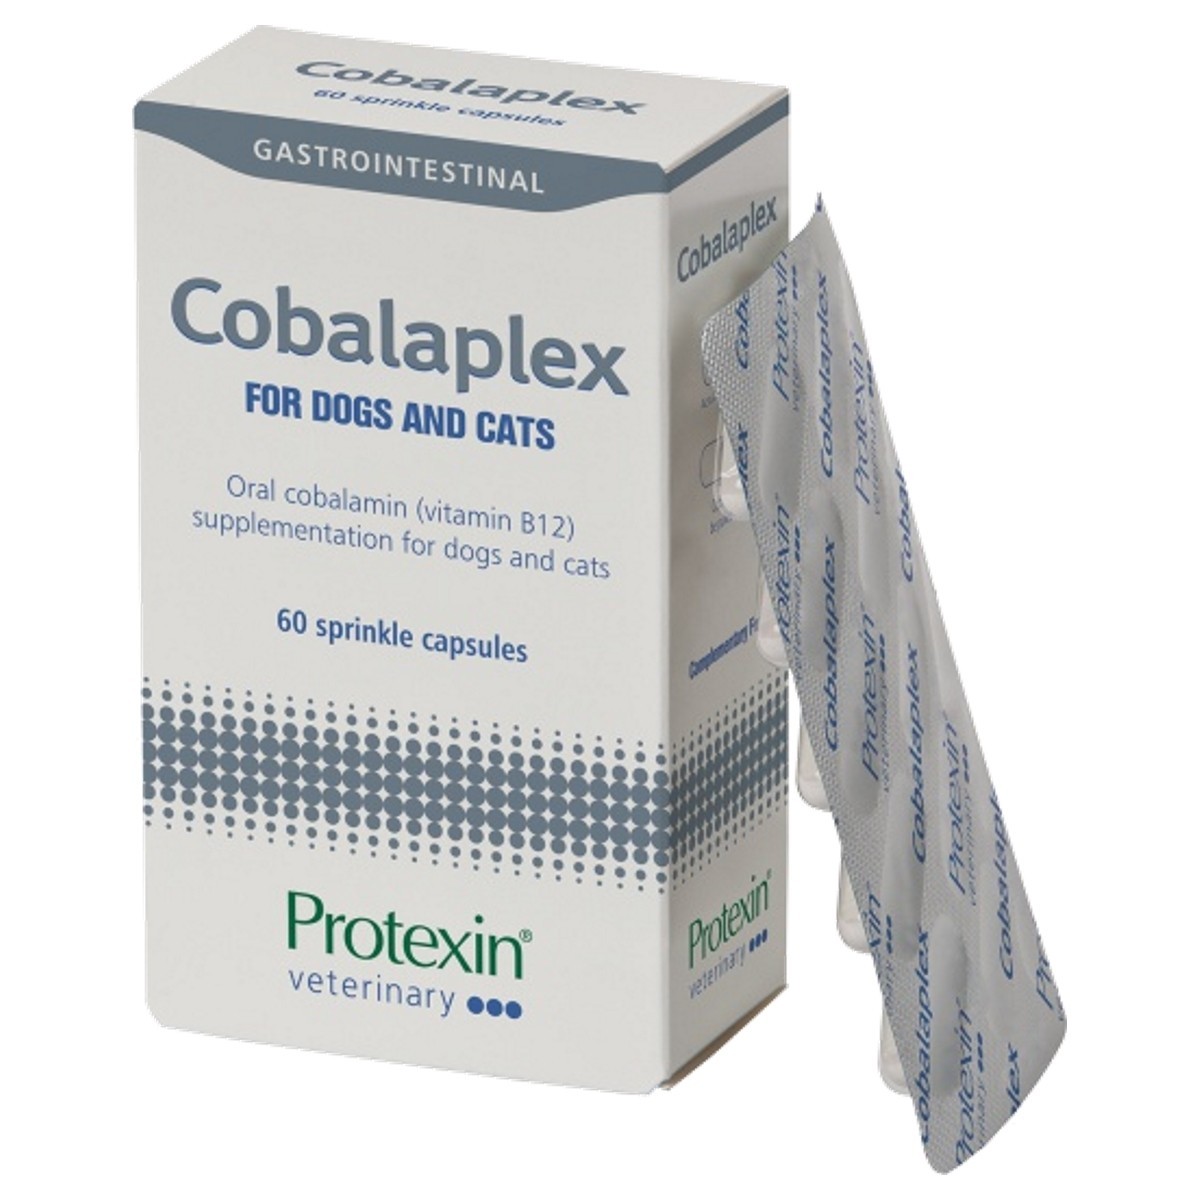 Protexin Cobalaplex For Cats And Dogs 60 Sprinkle Capsules From 15 06